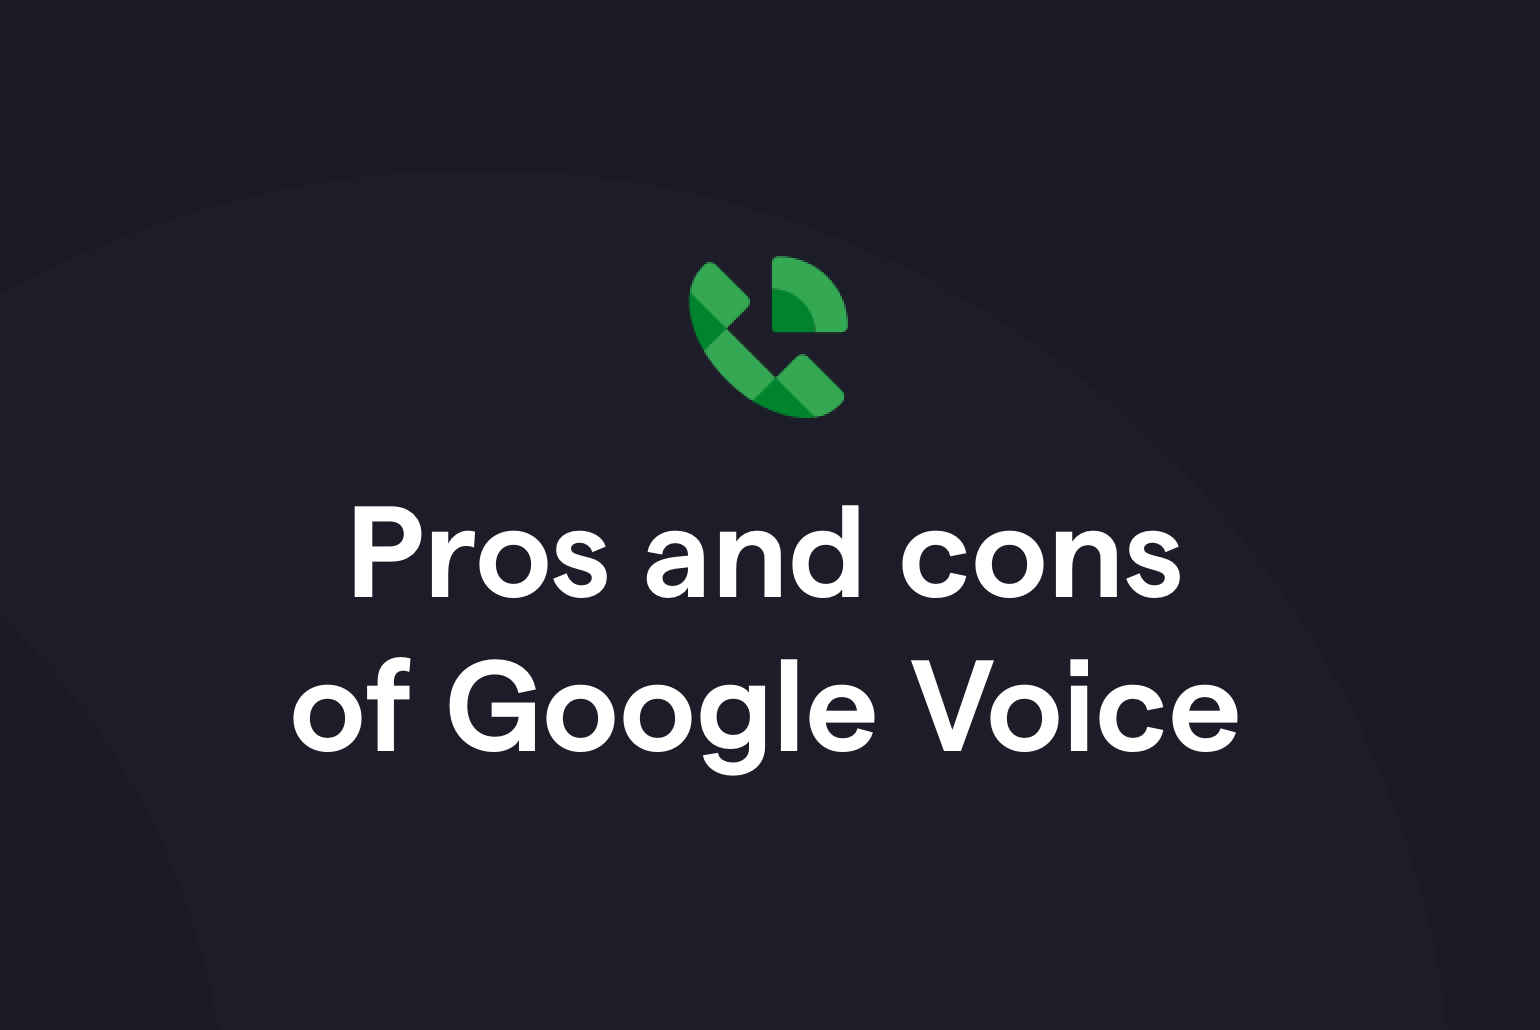 Pros and cons of Google Voice